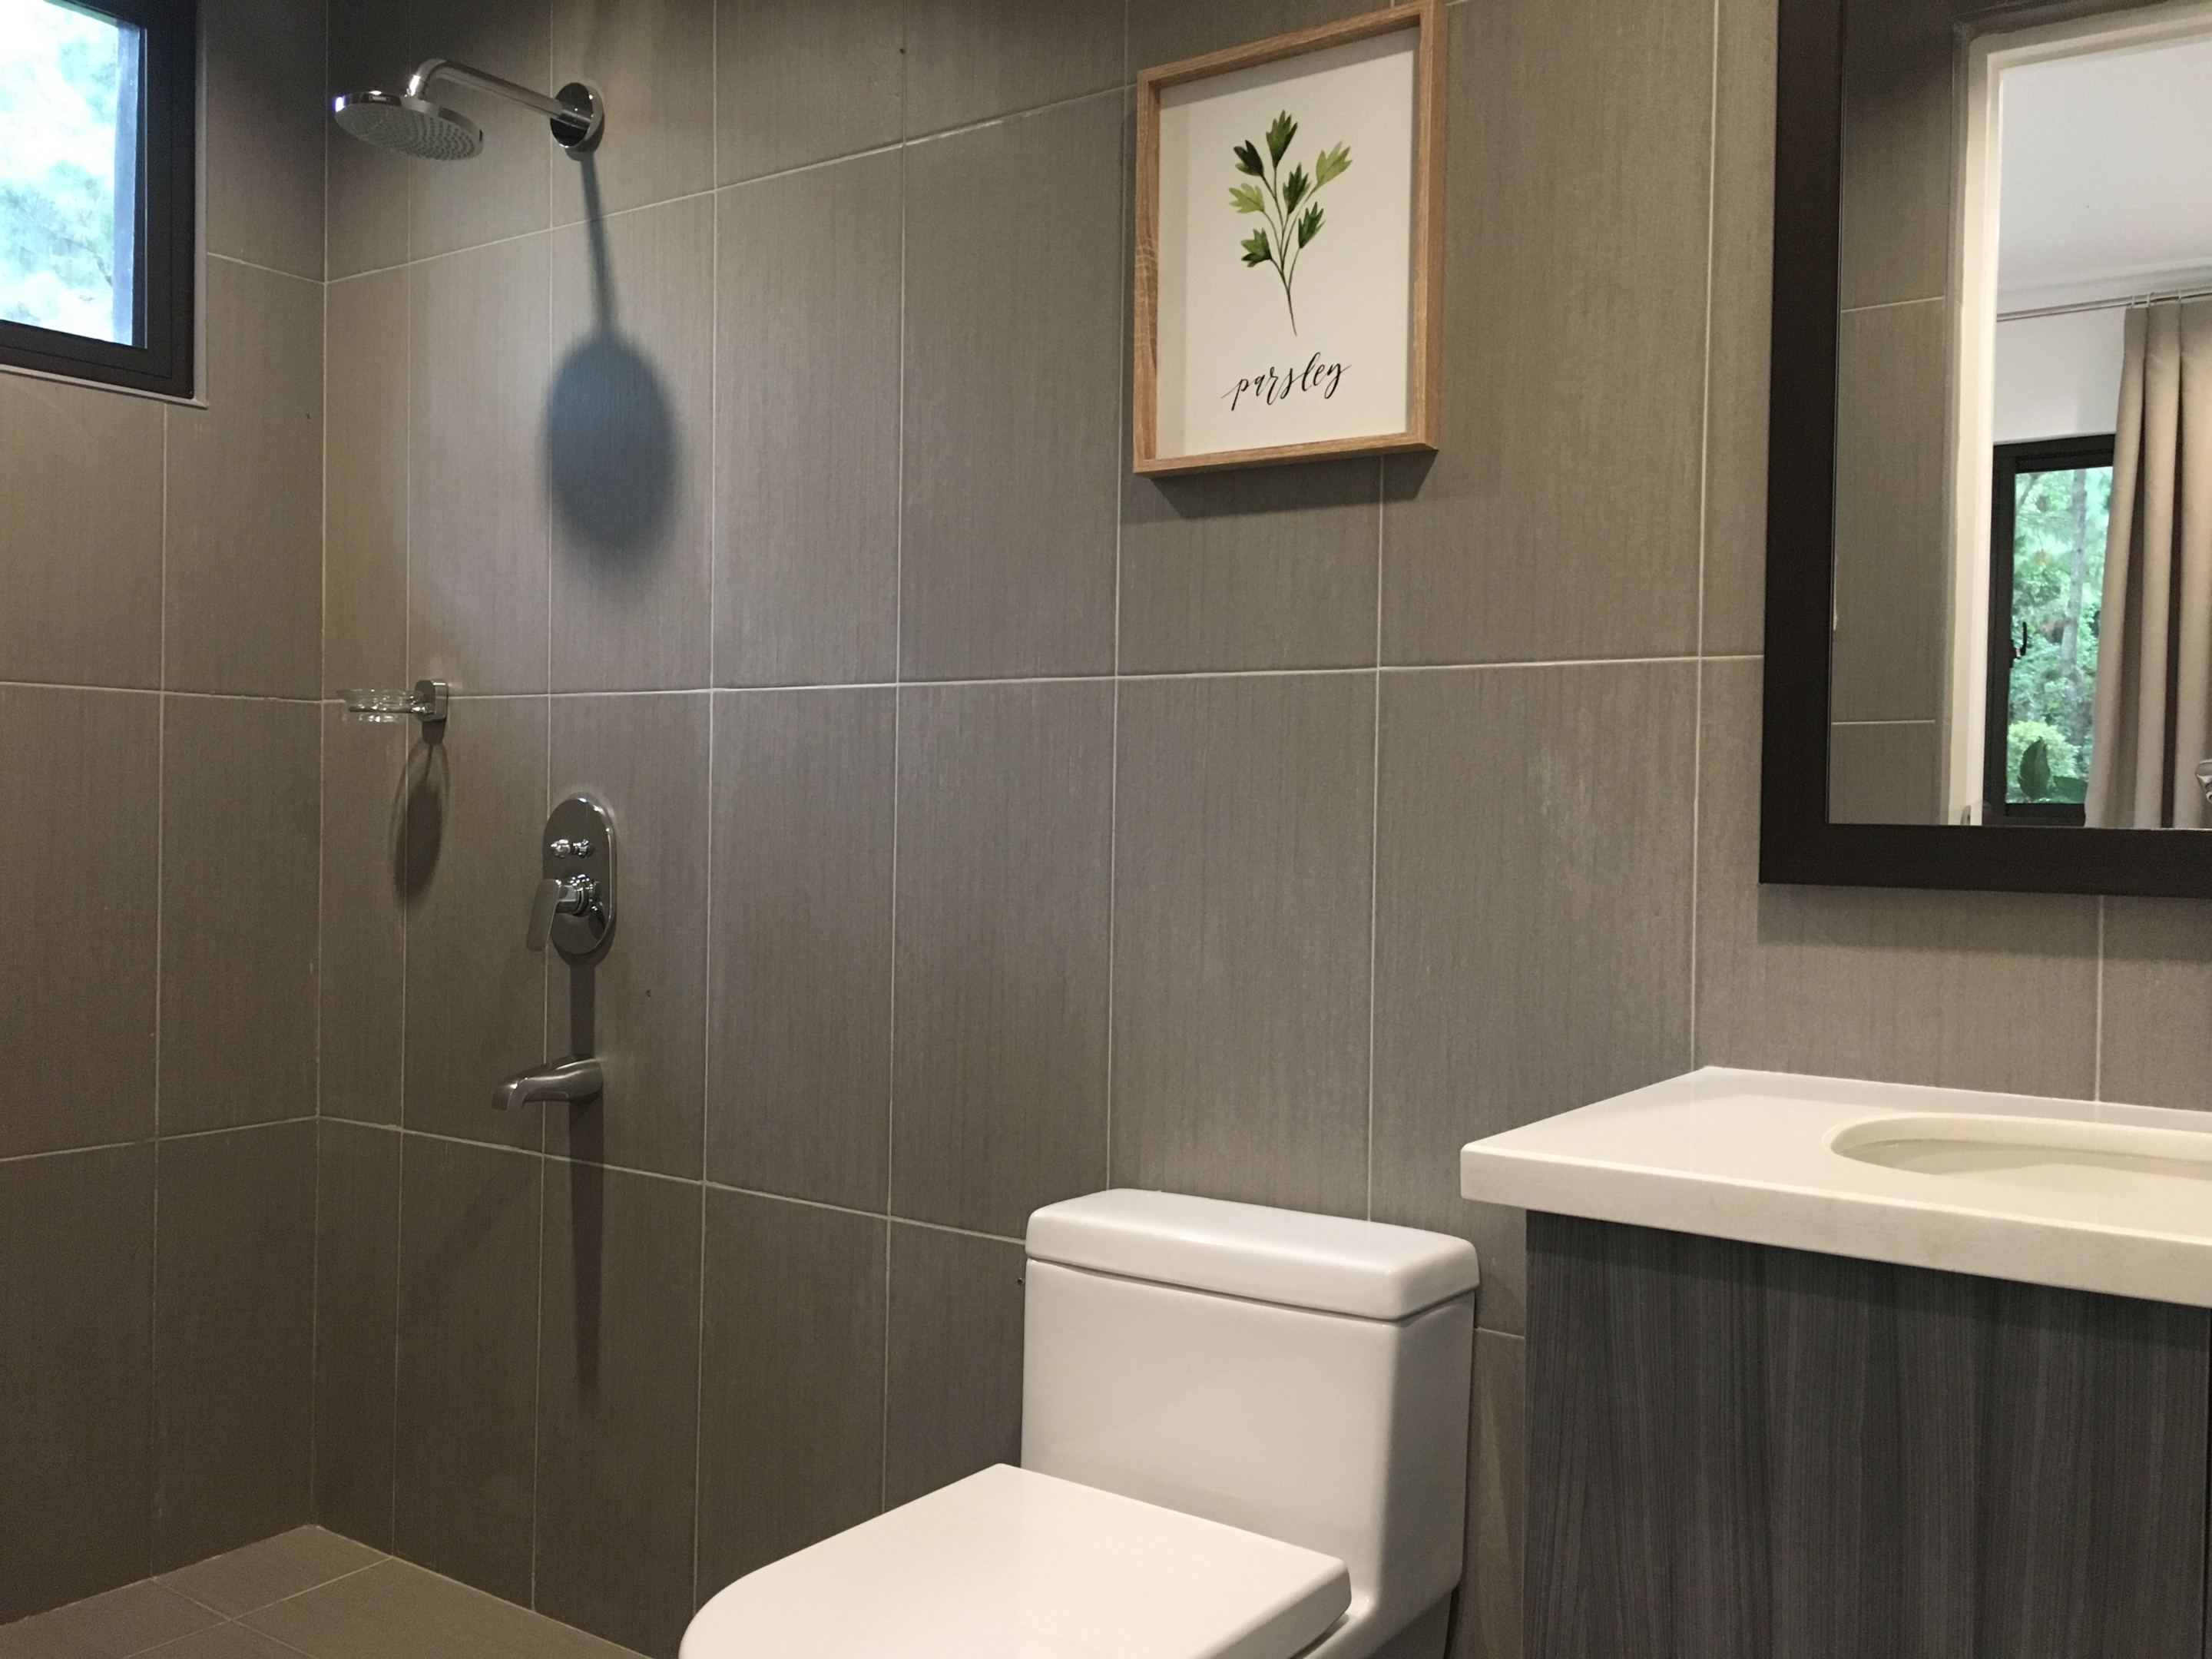 ceiling wall tiles and single tub stainless sink | Photo of Toilet and bath family room in Chatelard